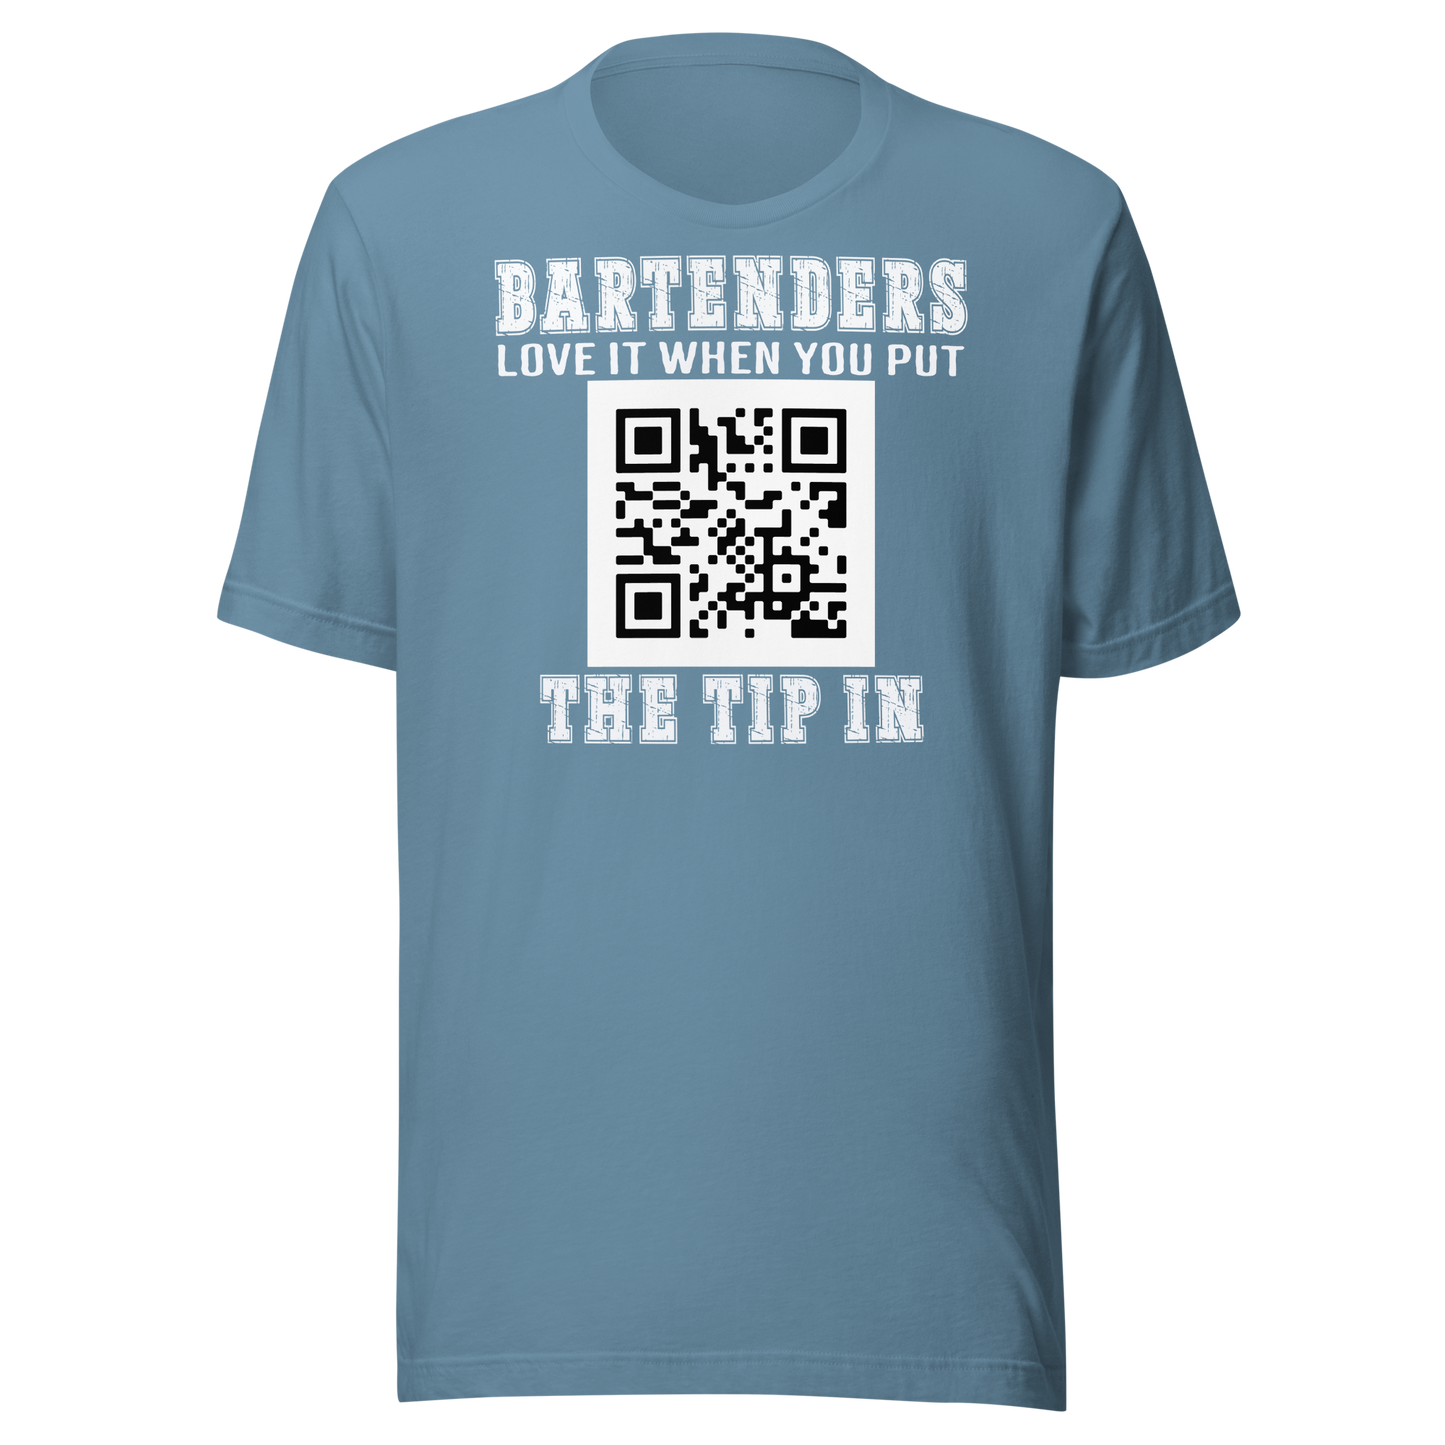 Bartenders Love It When You Put the Tip In - Personalizable Tee